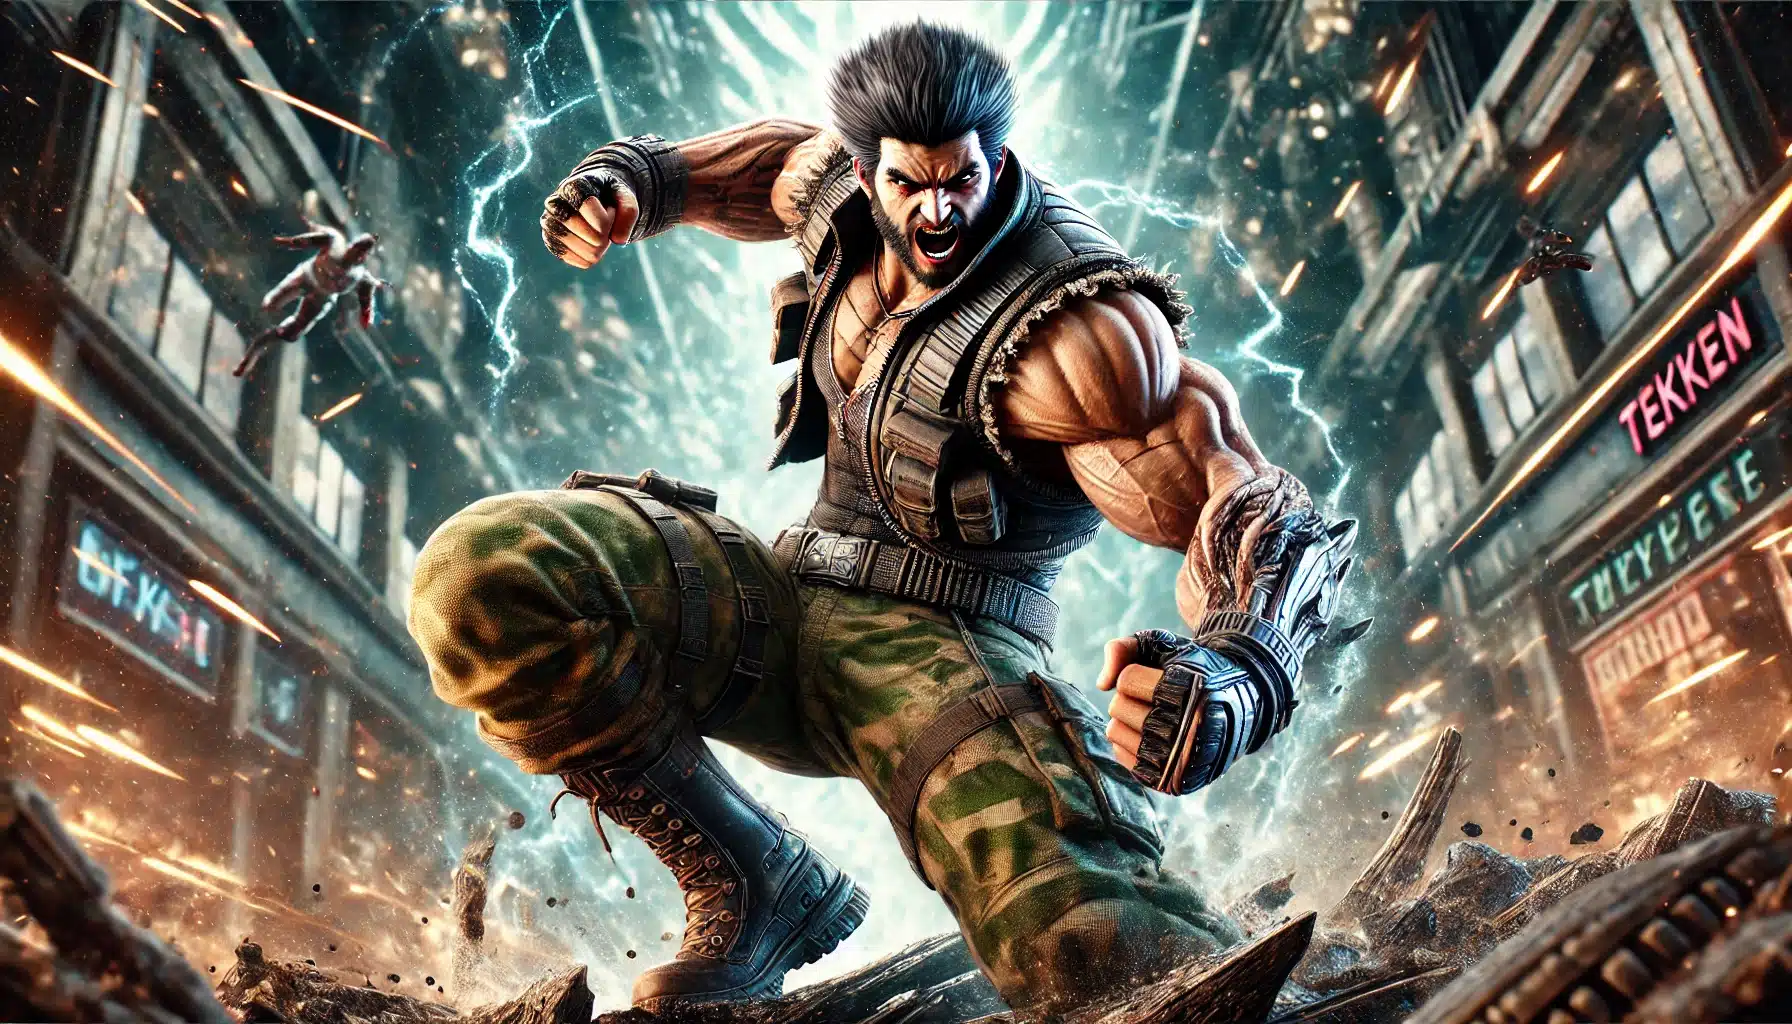 Bryan Fury from Tekken 8 unleashing a powerful attack in a dramatic urban setting, showcasing intense action, detailed graphics, and electrifying energy.